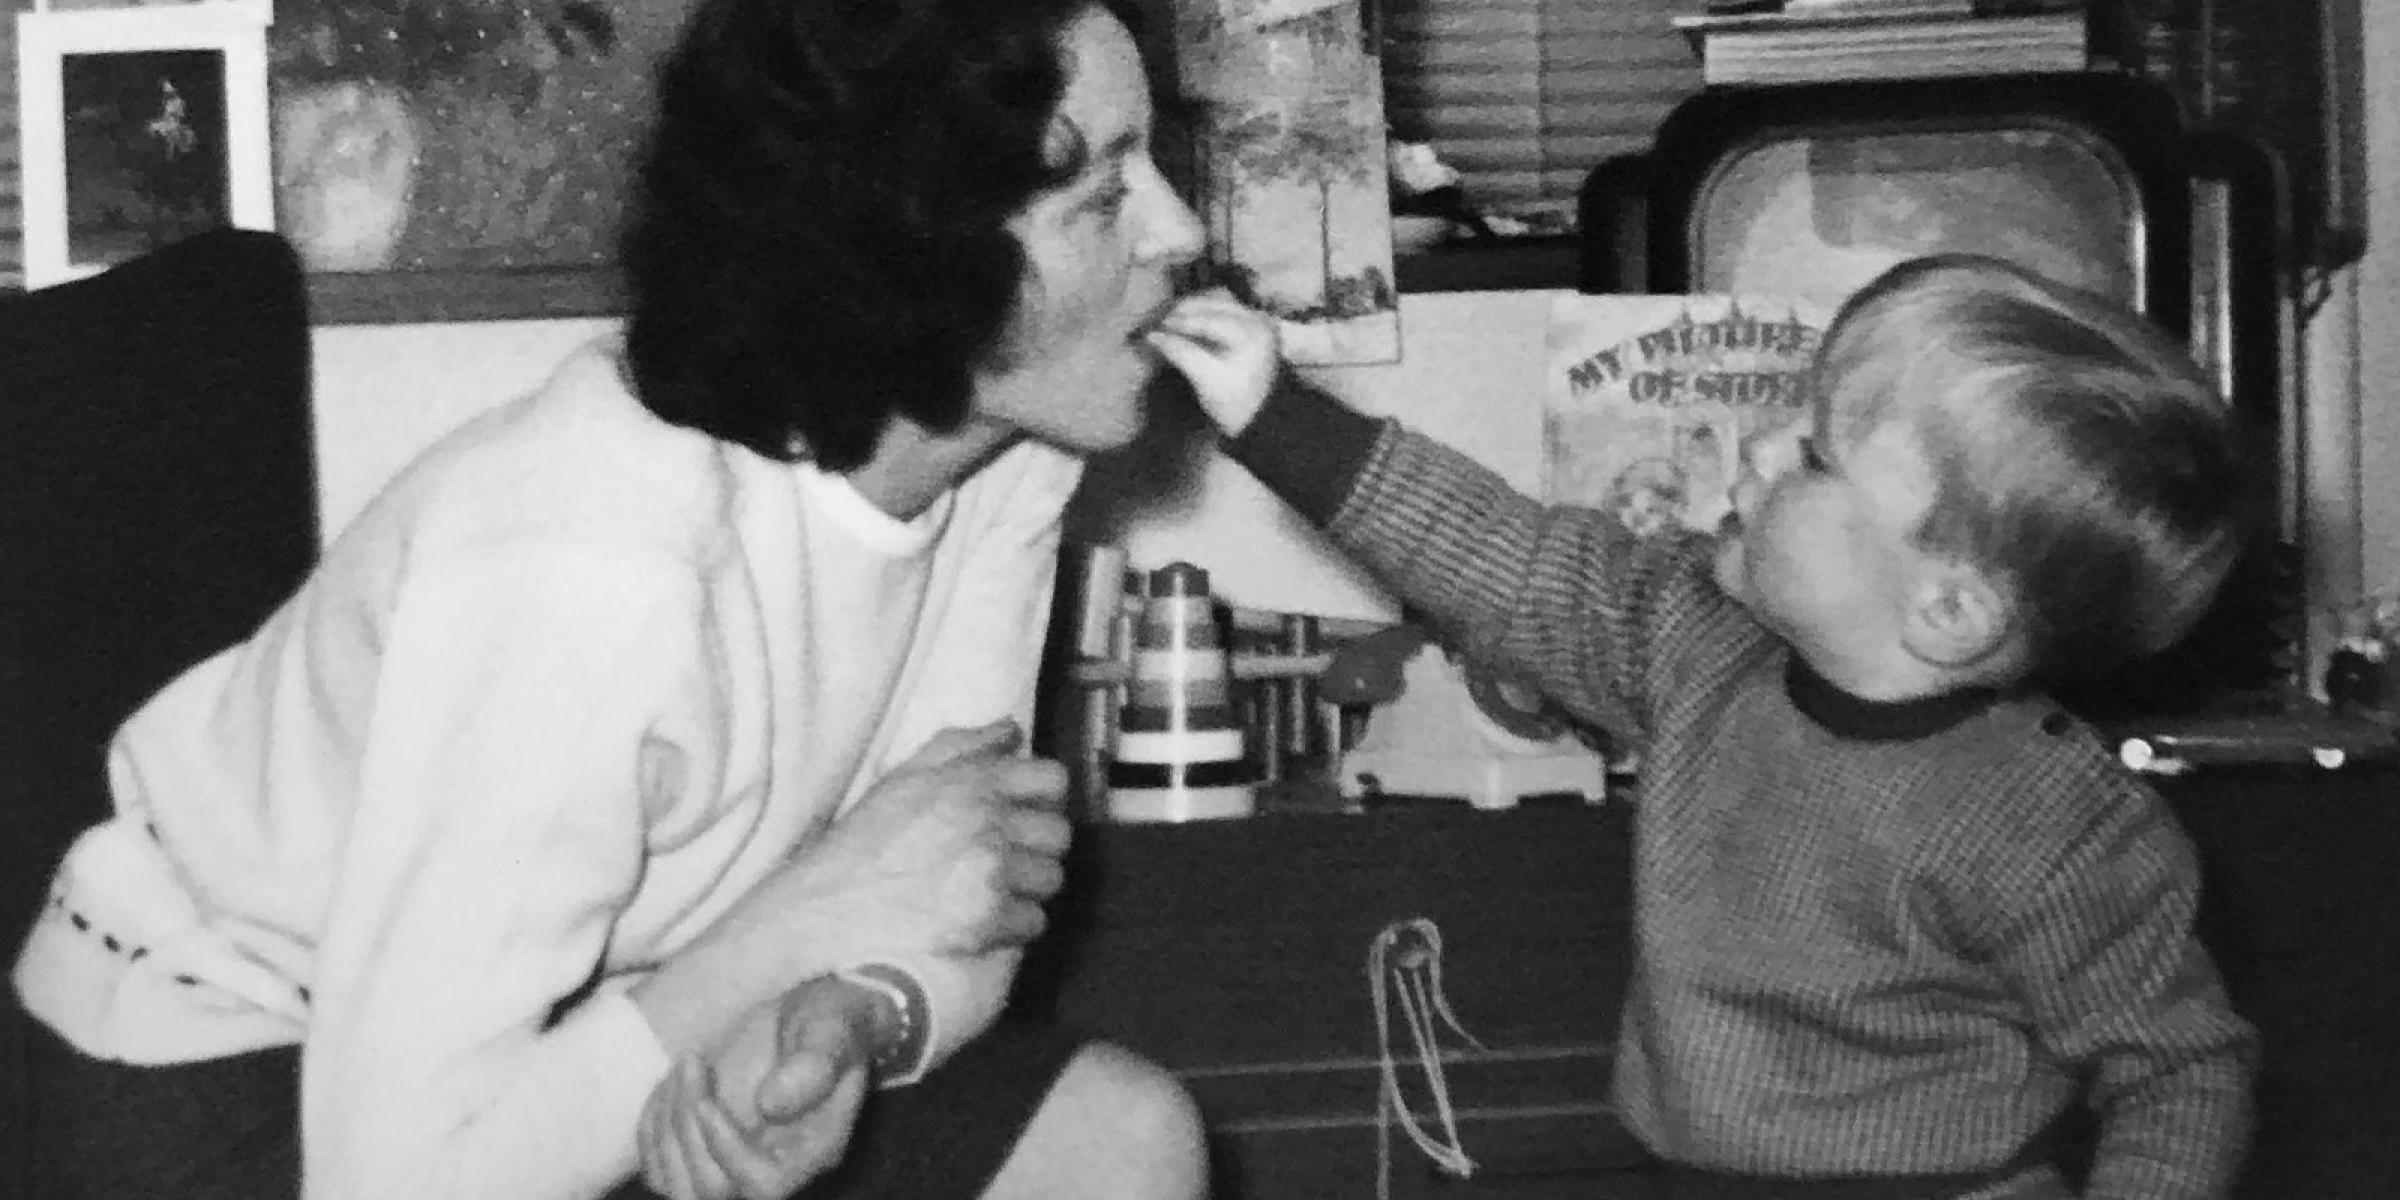 Martin Dewhurst as a boy, with his mother